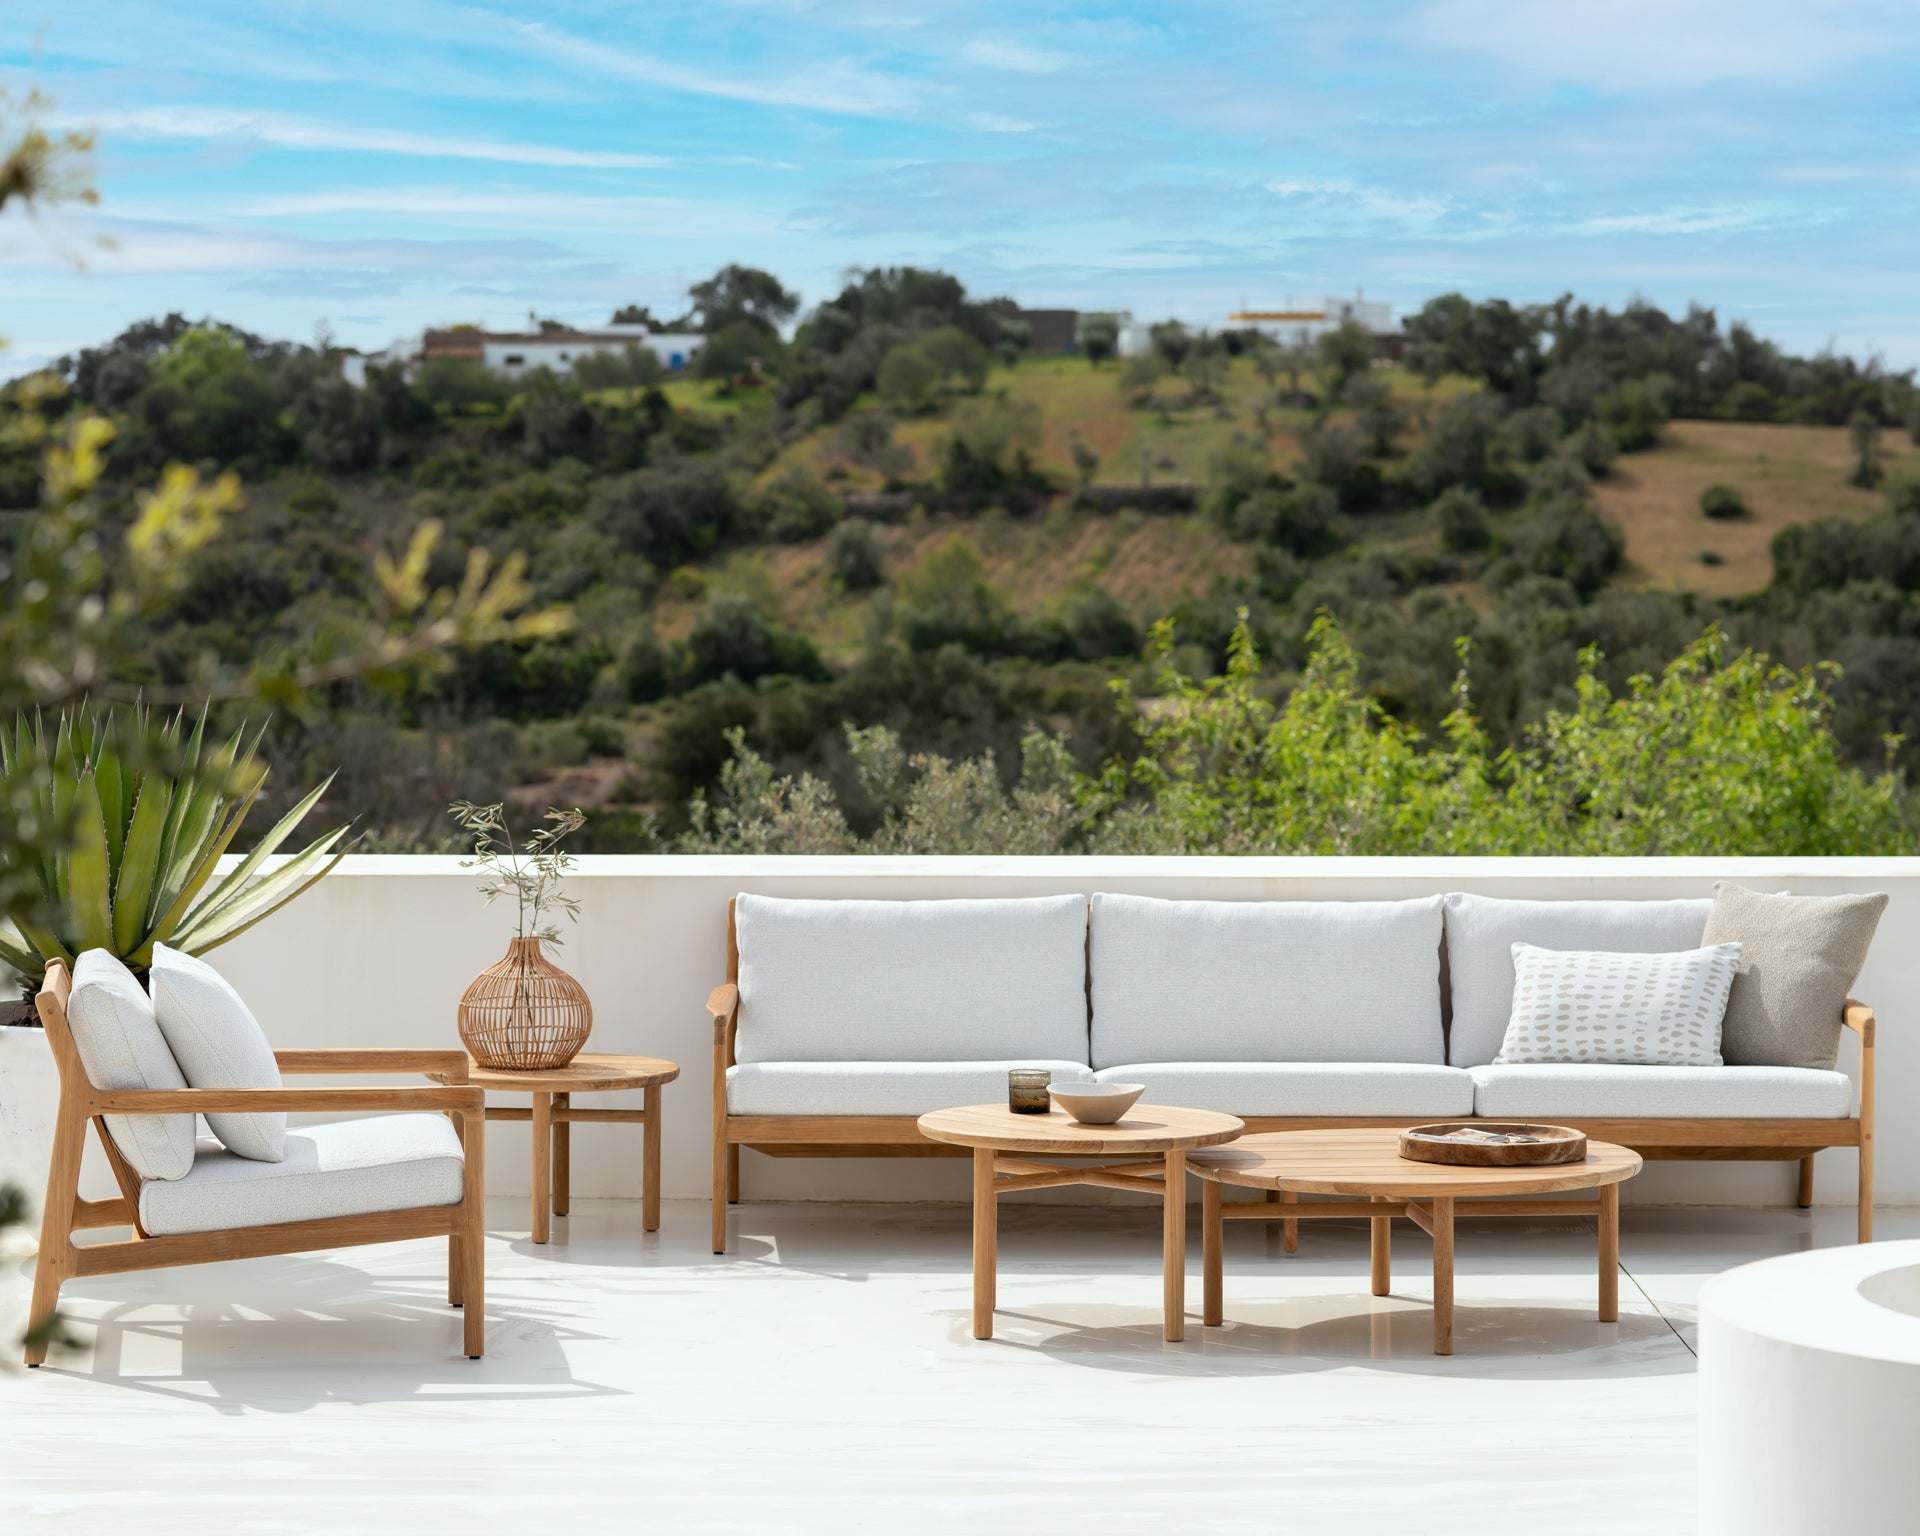 Jack Solid Teak Outdoor 3 Seater Sofa, Off White Fabric